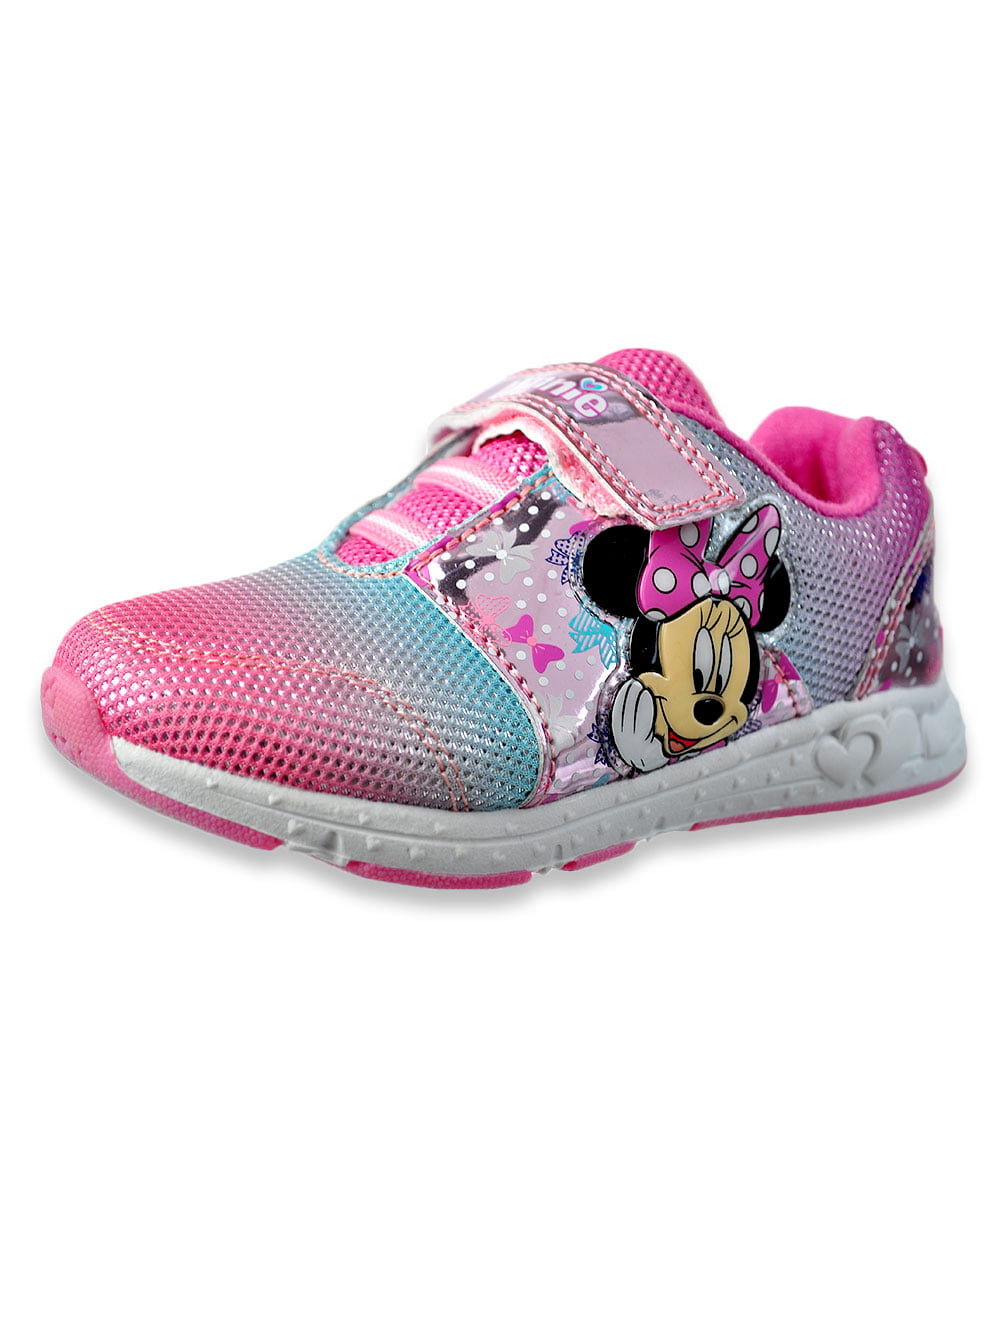 MINNIE MOUSE DISNEY JUNIOR Girls Sneakers Athletic Shoes NWT Toddler Size 9 NWT 